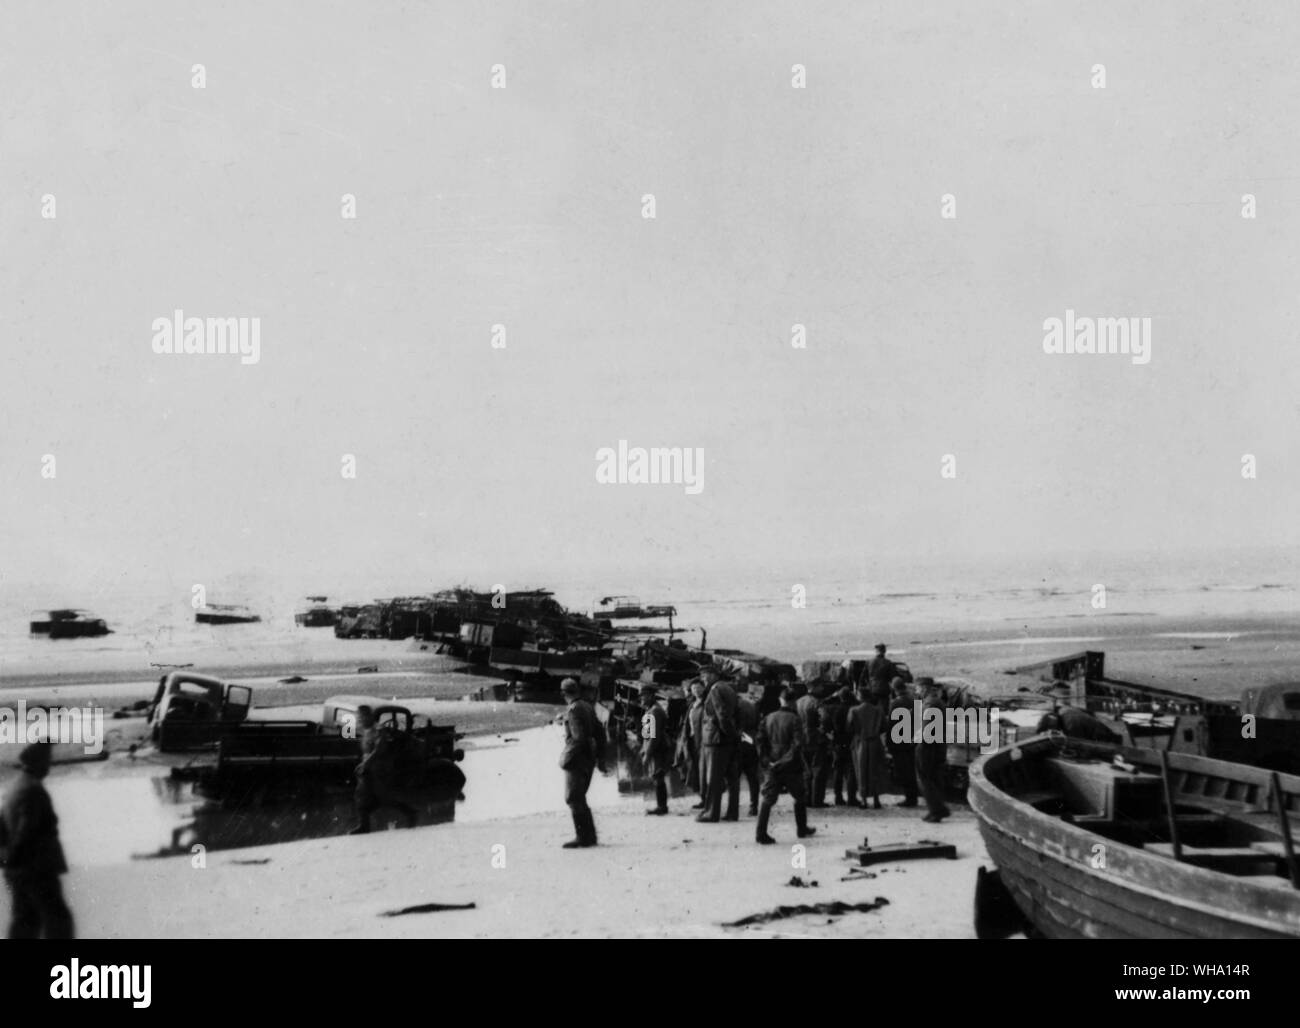 WW2: Pier made by British lorries at Dunkirk. Germans are on the beach after the evacuation. 1940. Stock Photo